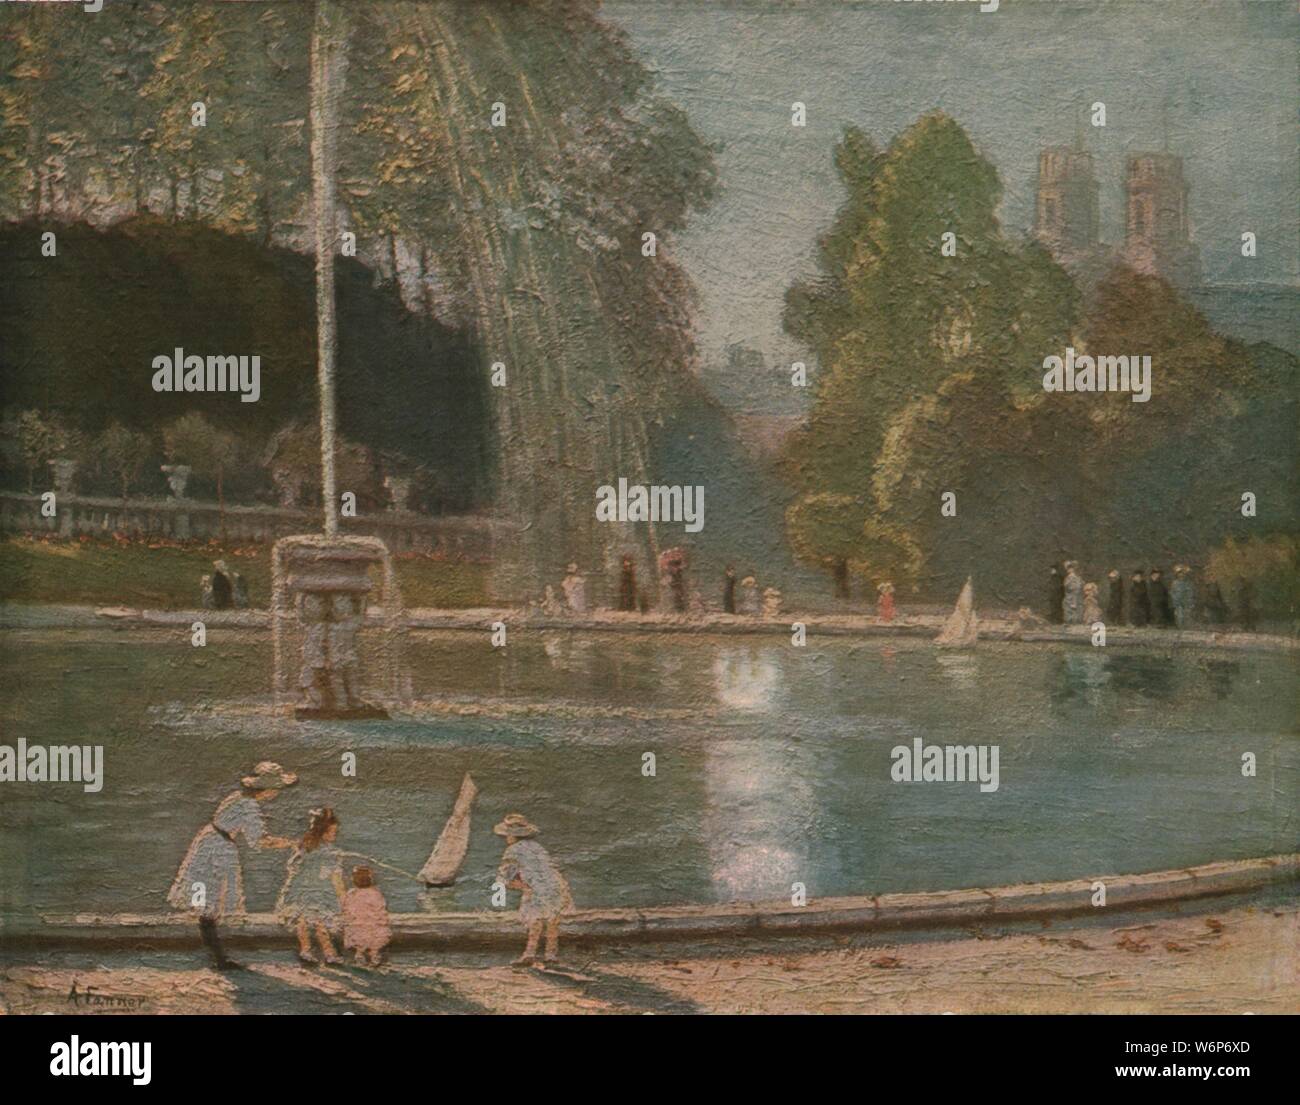 'La Fontaine', late 19th-early 20th century, (c1930). 'The Fountain': children sailing a toy boat on an ornamental lake. Painting in the Dudley Museum and Art Gallery, West Midlands. From &quot;Modern Masterpieces of British Art&quot;. [The Amalgamated Press Ltd., London, c1930] Stock Photo